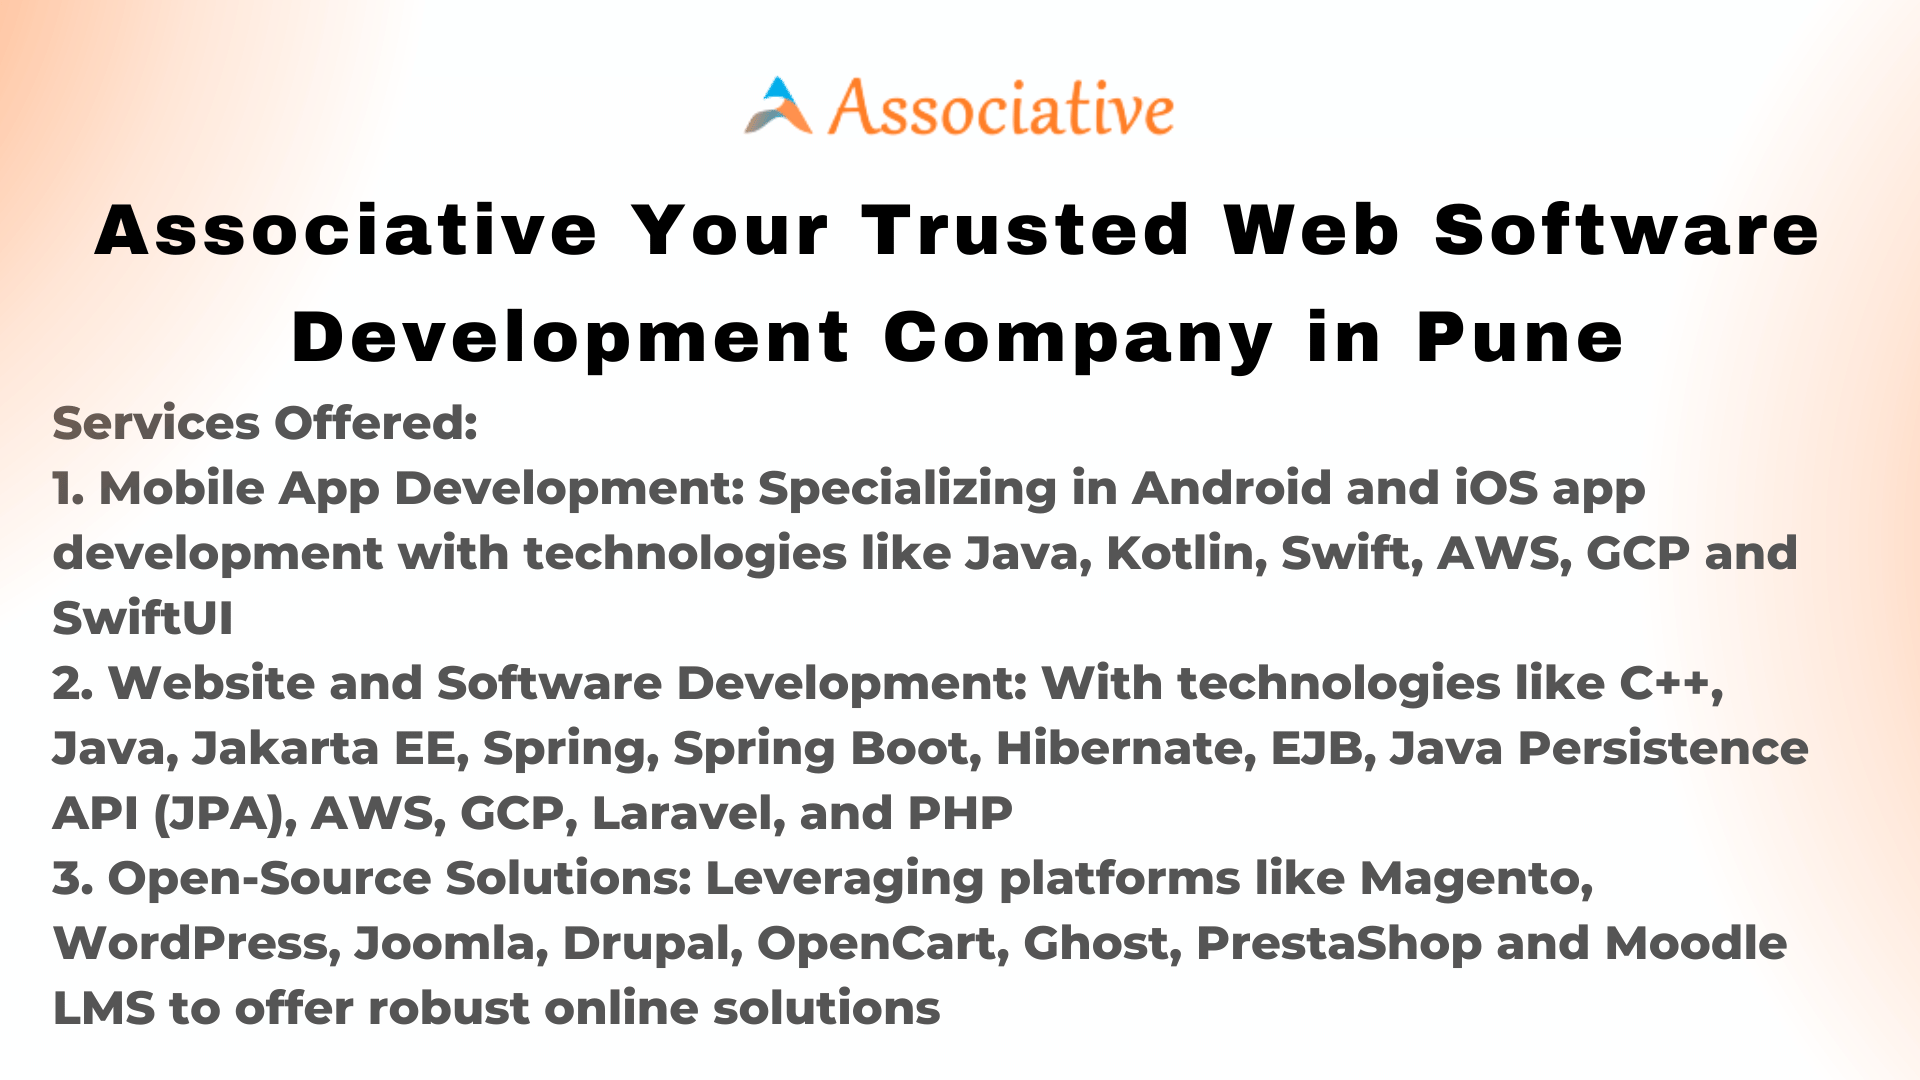 Associative Your Trusted Web Software Development Company in Pune